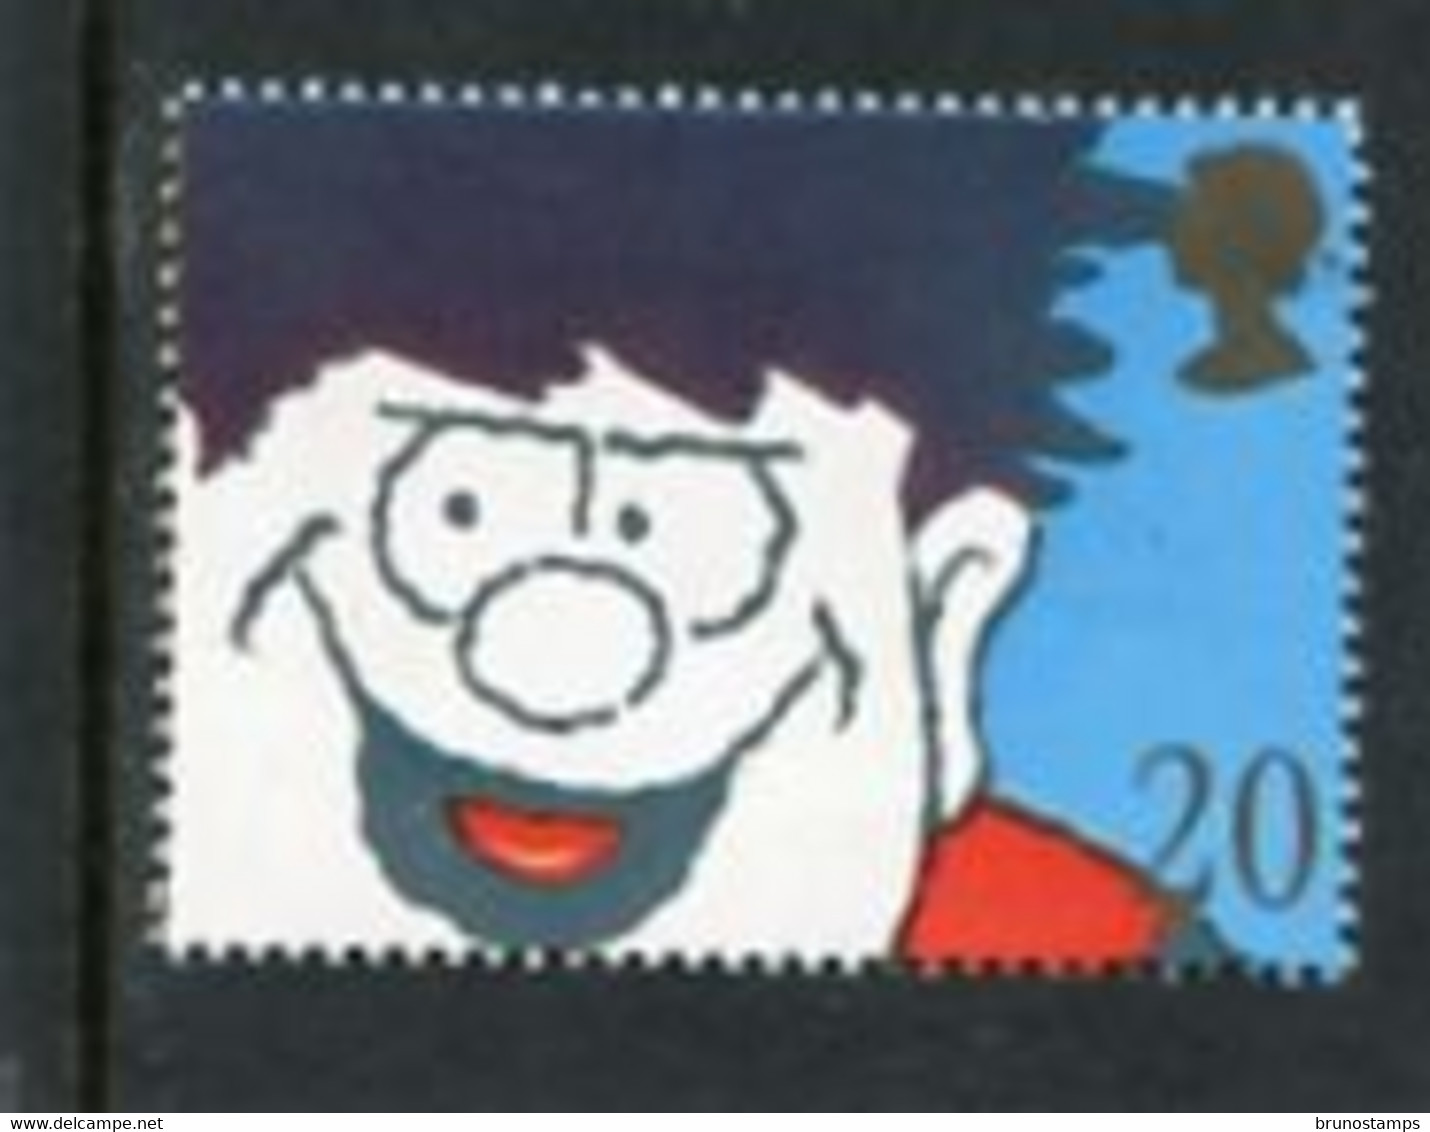 GREAT BRITAIN - 1990  DENNIS THE MENACE  MINT NH - Unclassified